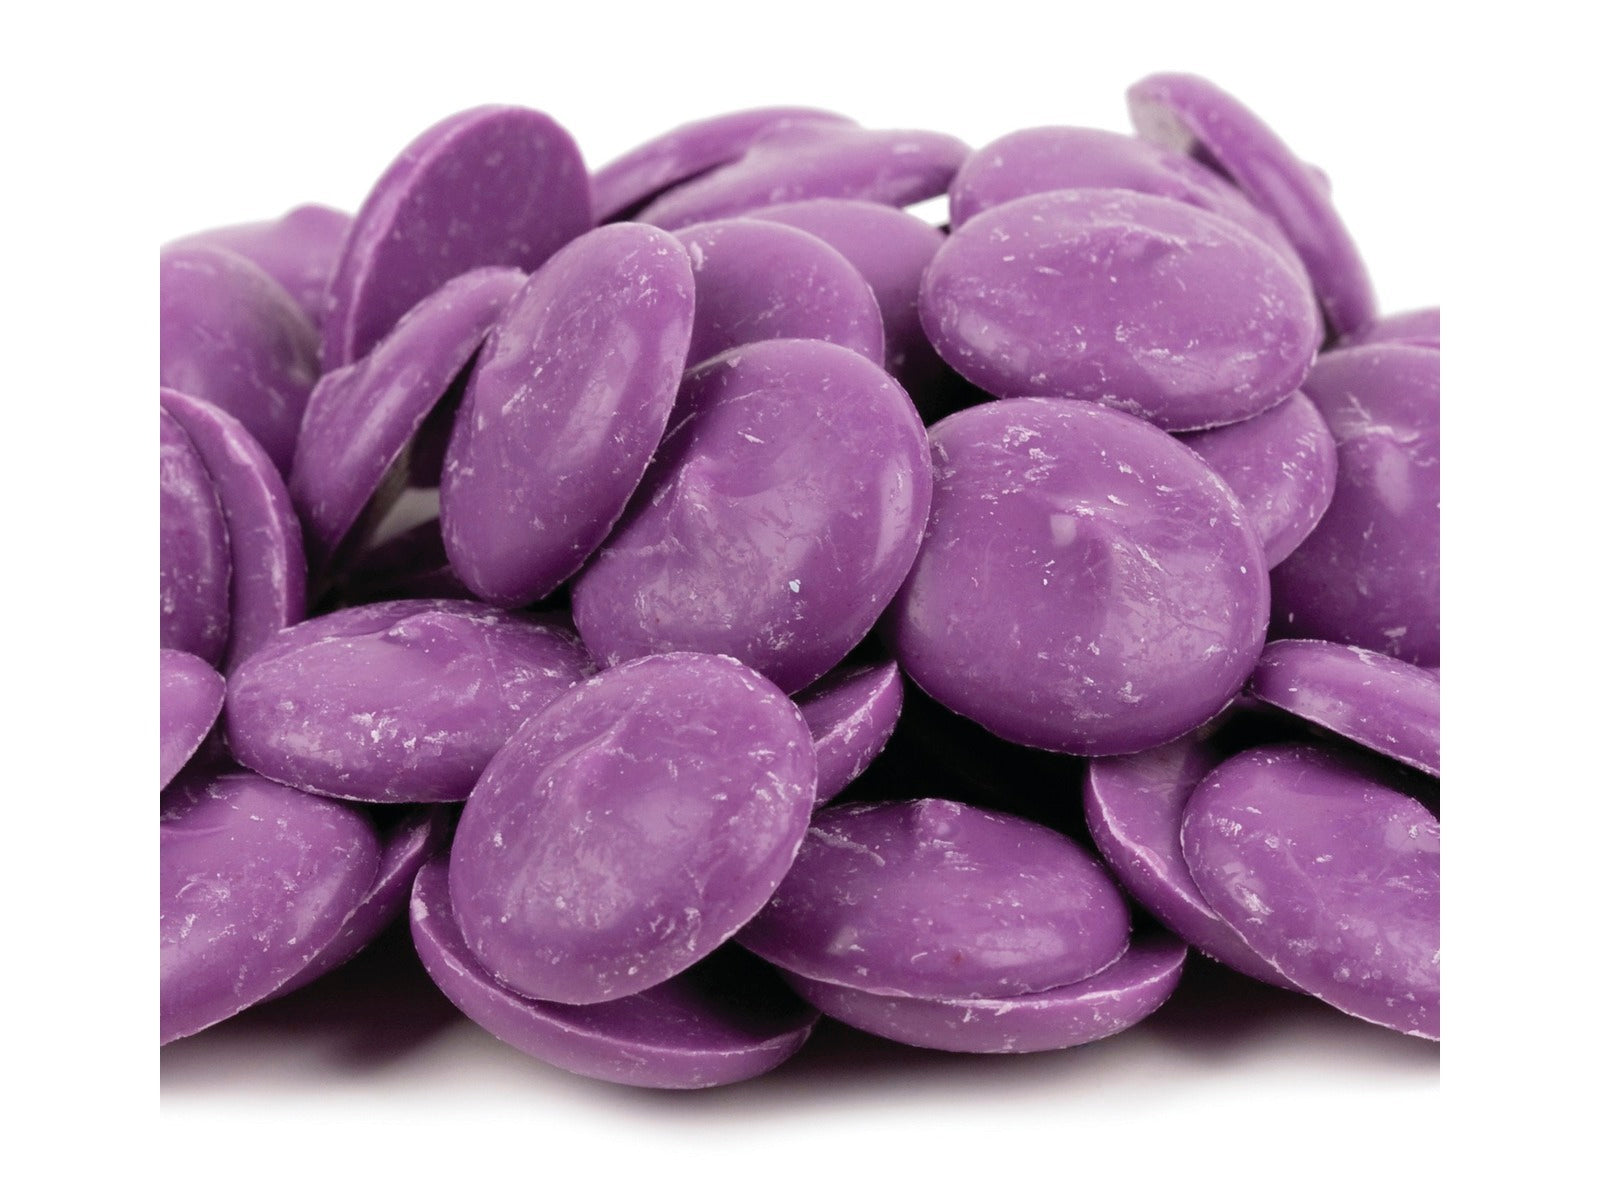 image of merckens orchid or purple chocolate candy melts in wafer form